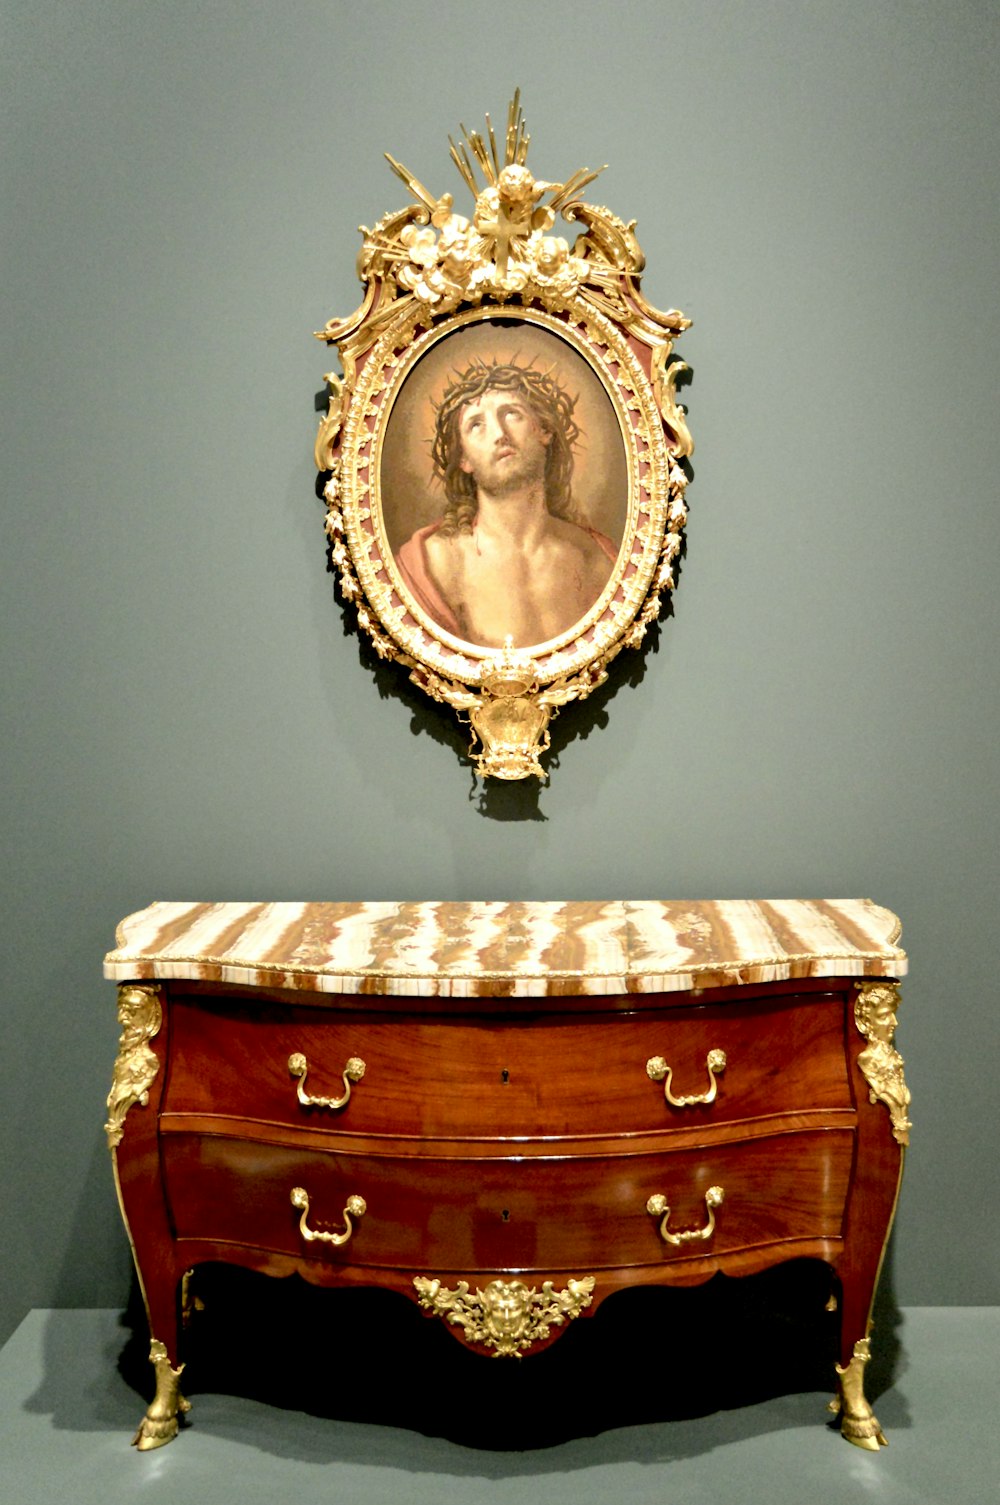 a gold and ornate chest with a picture on top